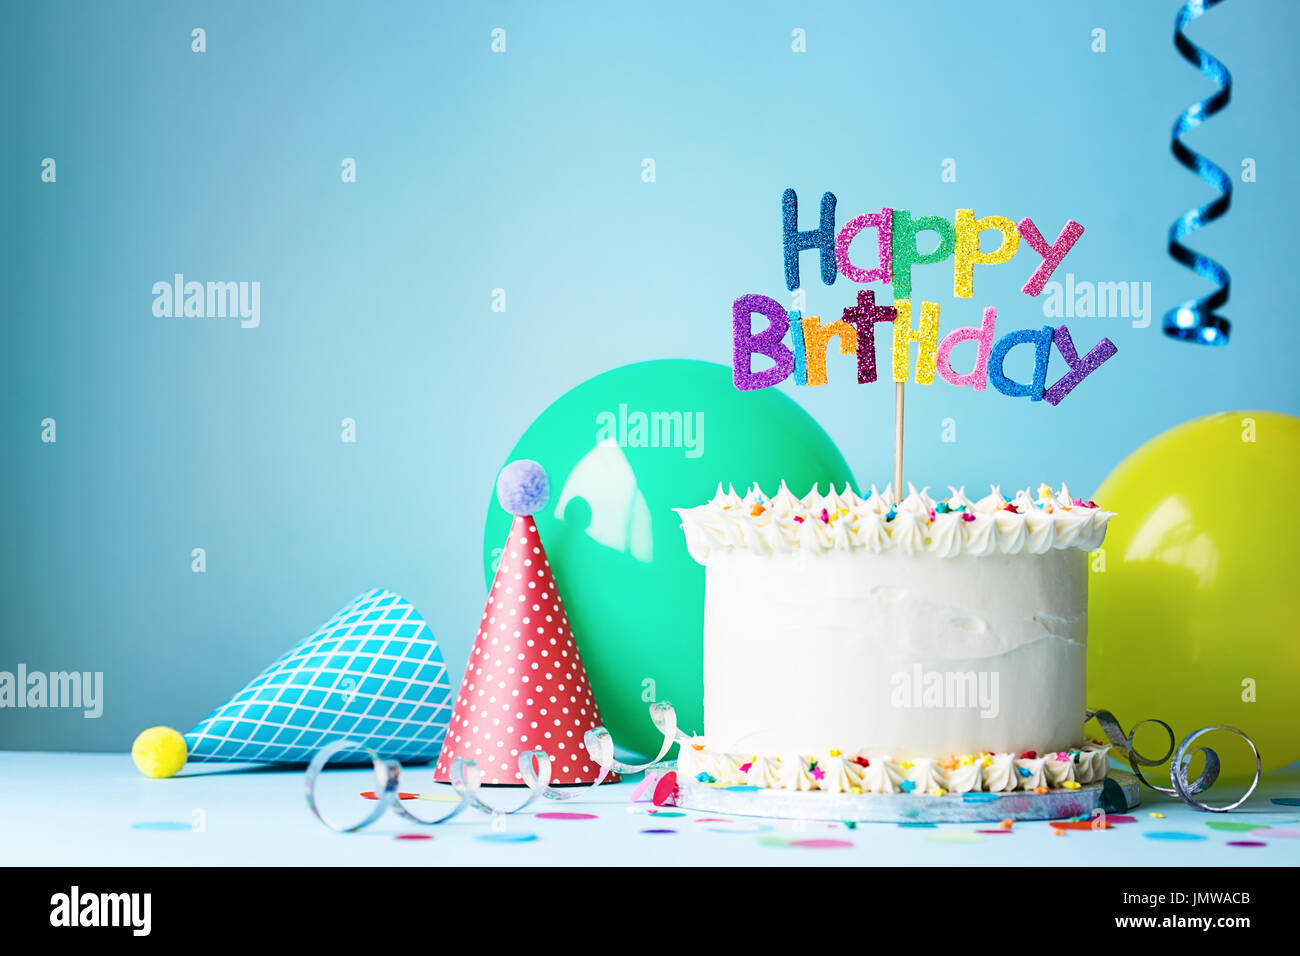 Birthday cake with colorful greeting Stock Photo